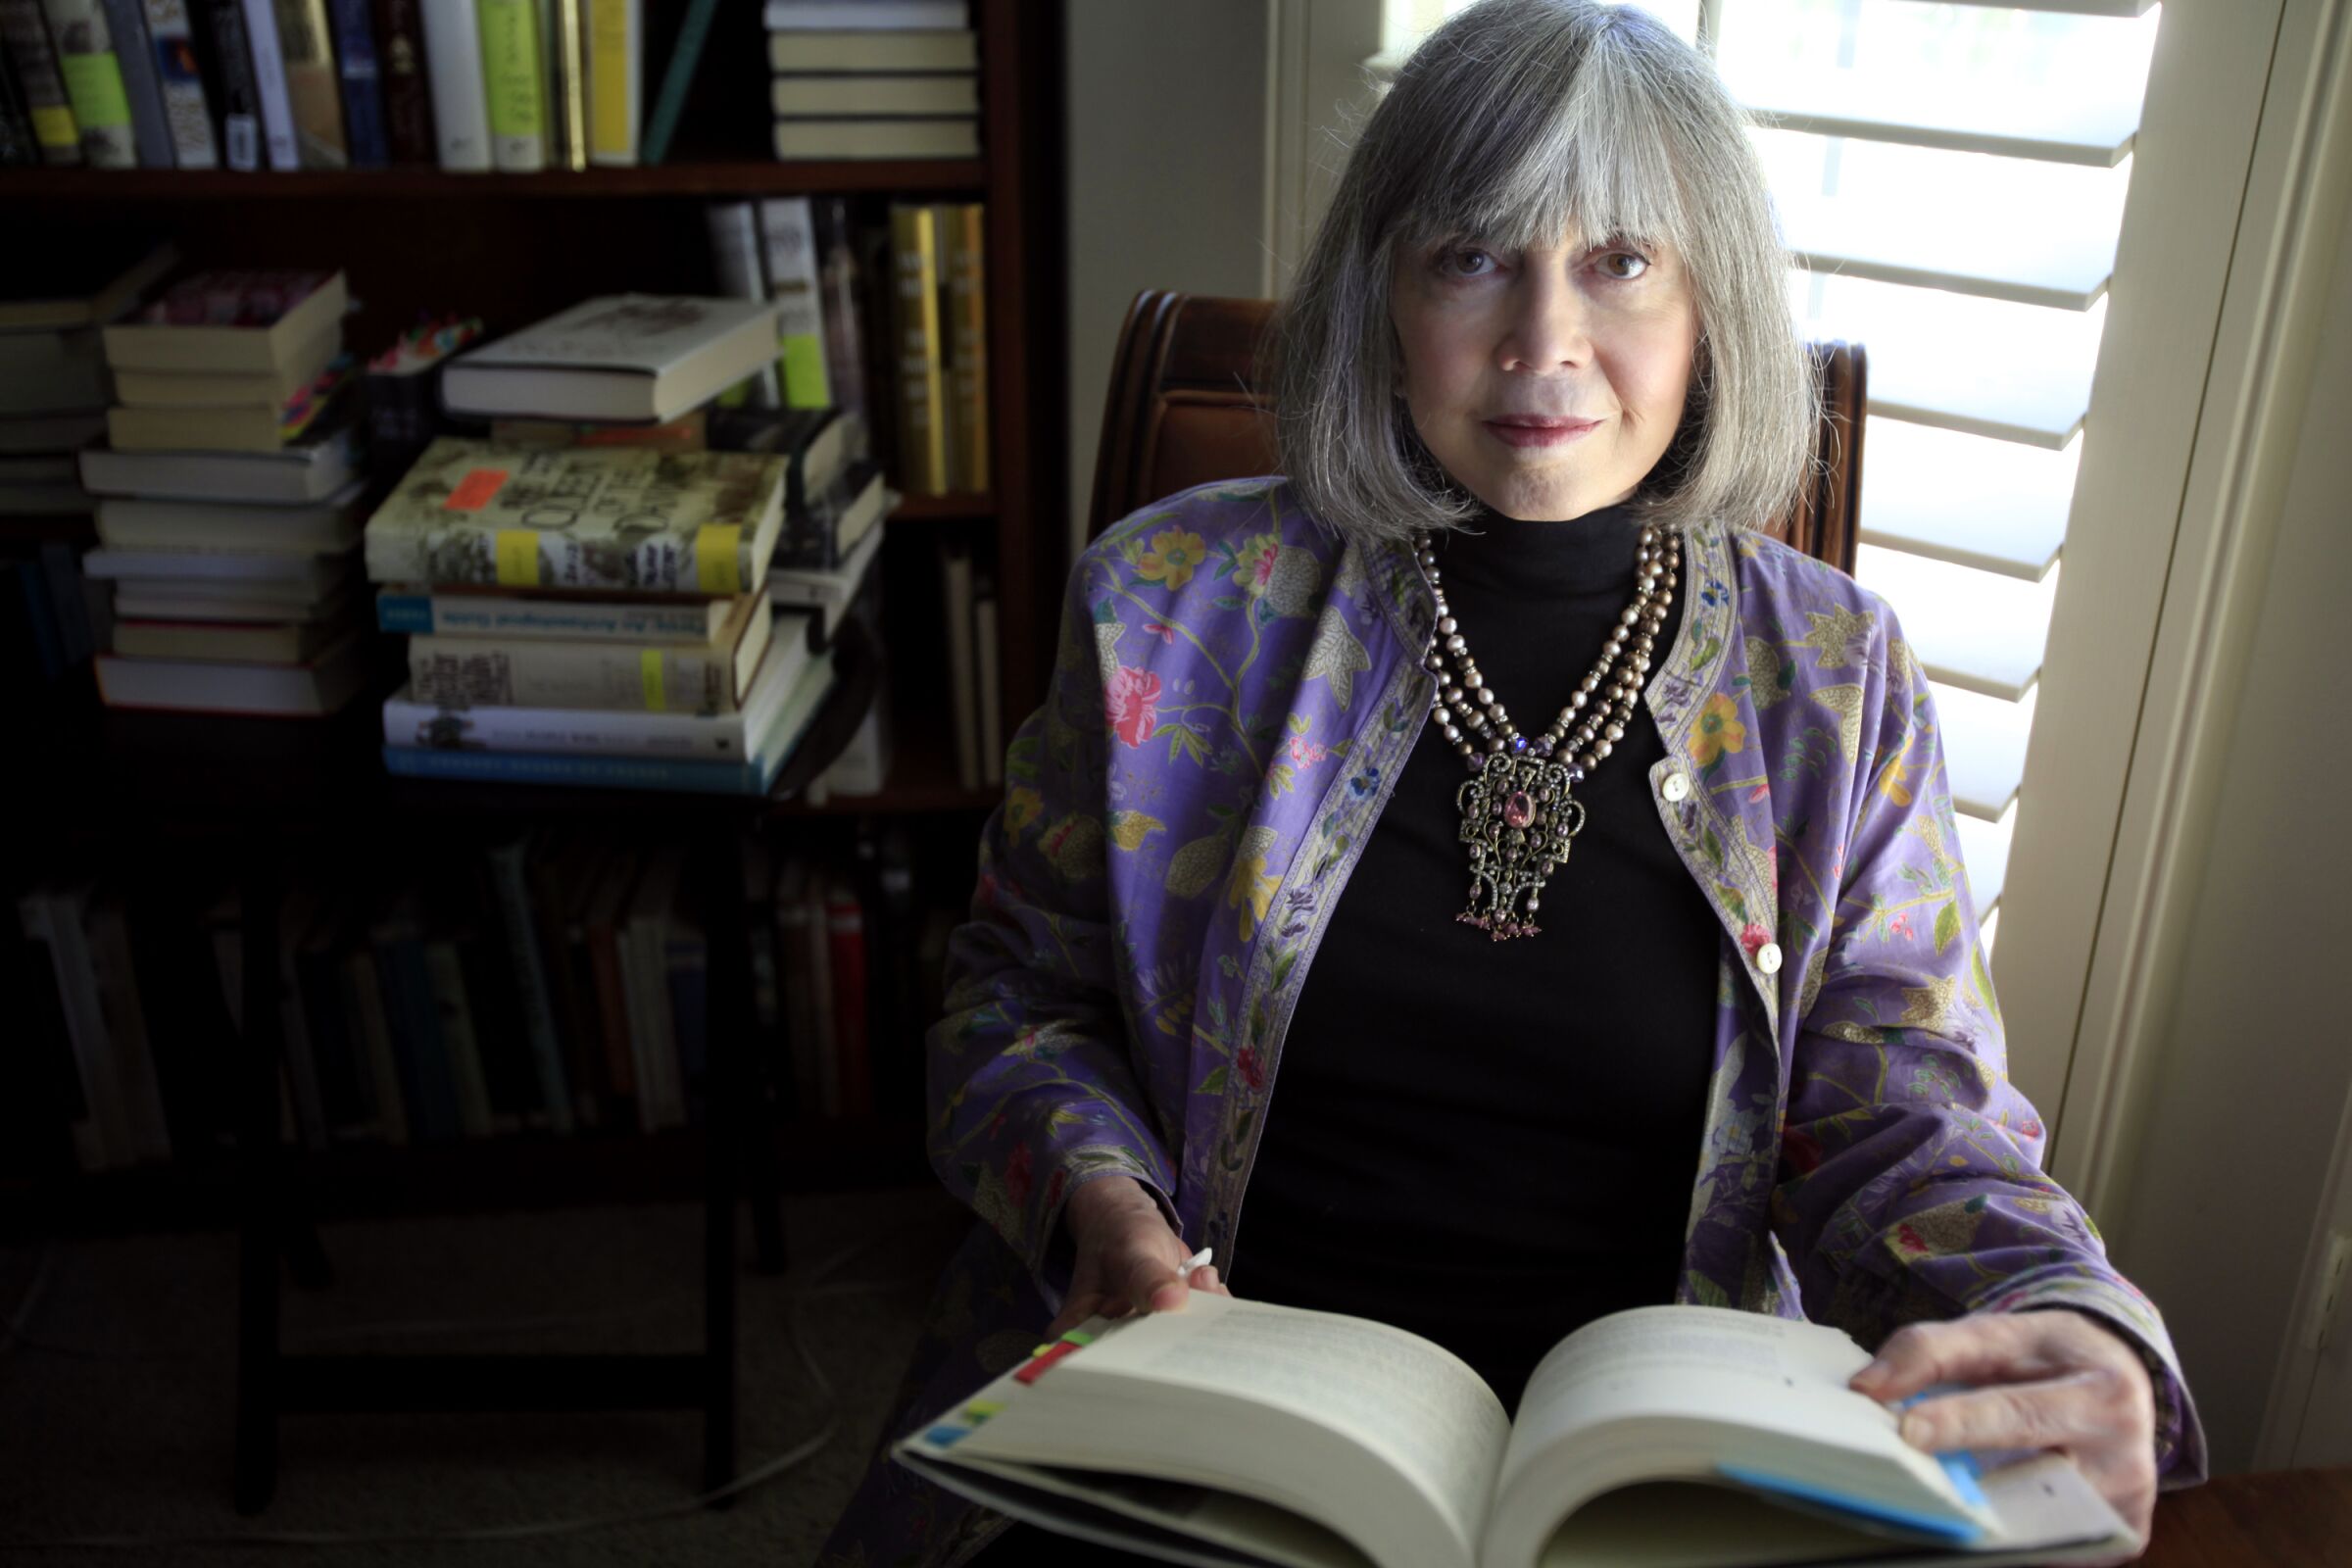 Anne Rice holds a book in her hands as she looks at the camera